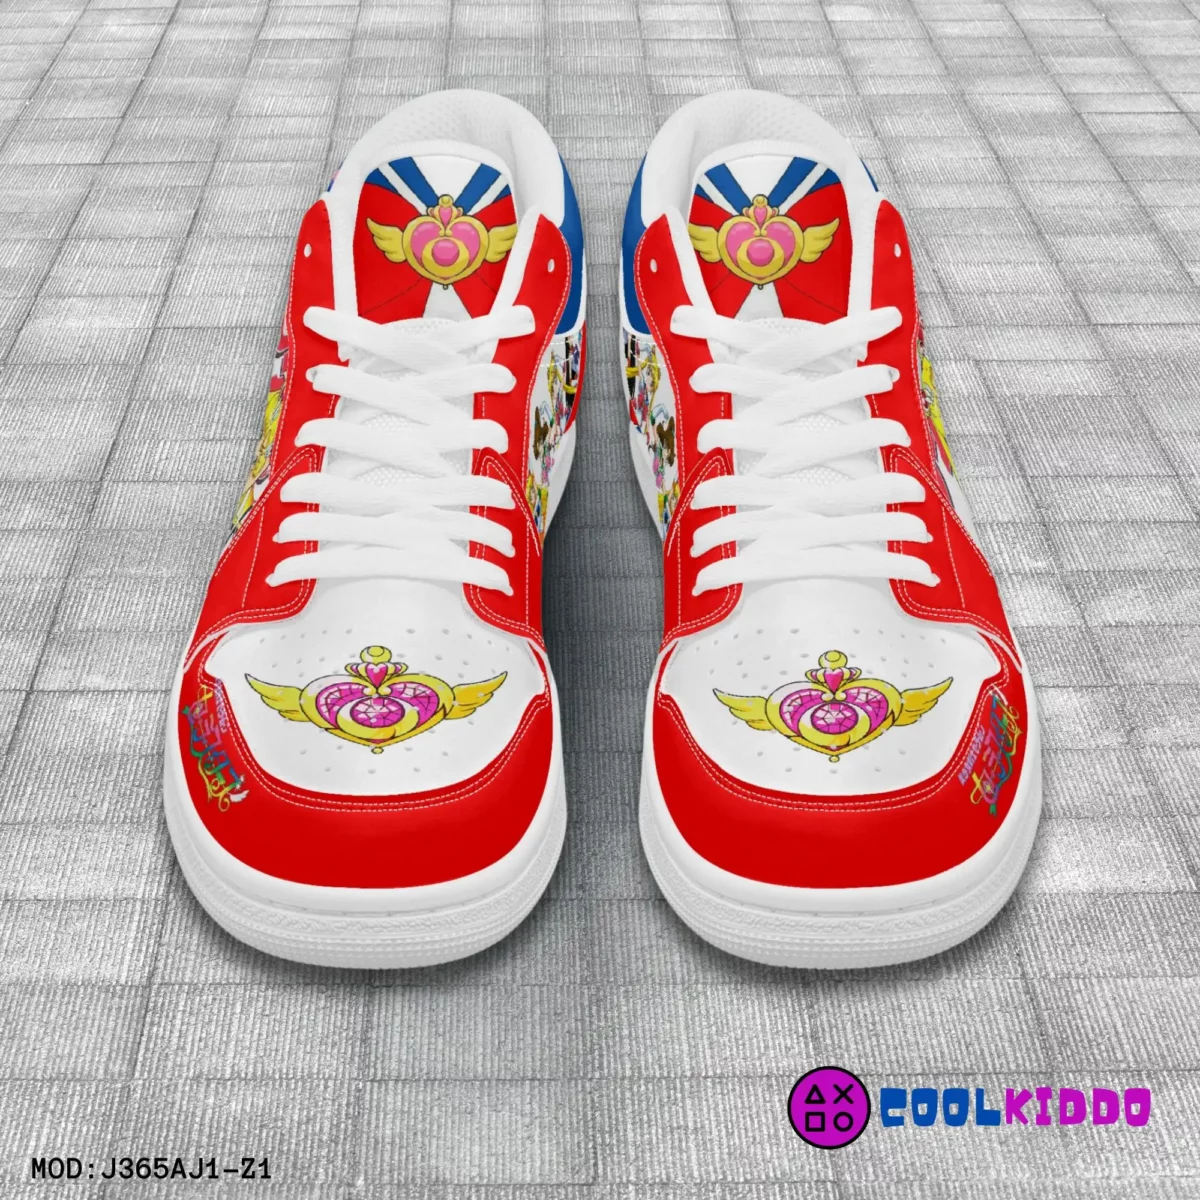 Salior Moon Anime Series Inspired Low-Top Leather Sneakers for youth/adults. Character Print Shoes Cool Kiddo 14